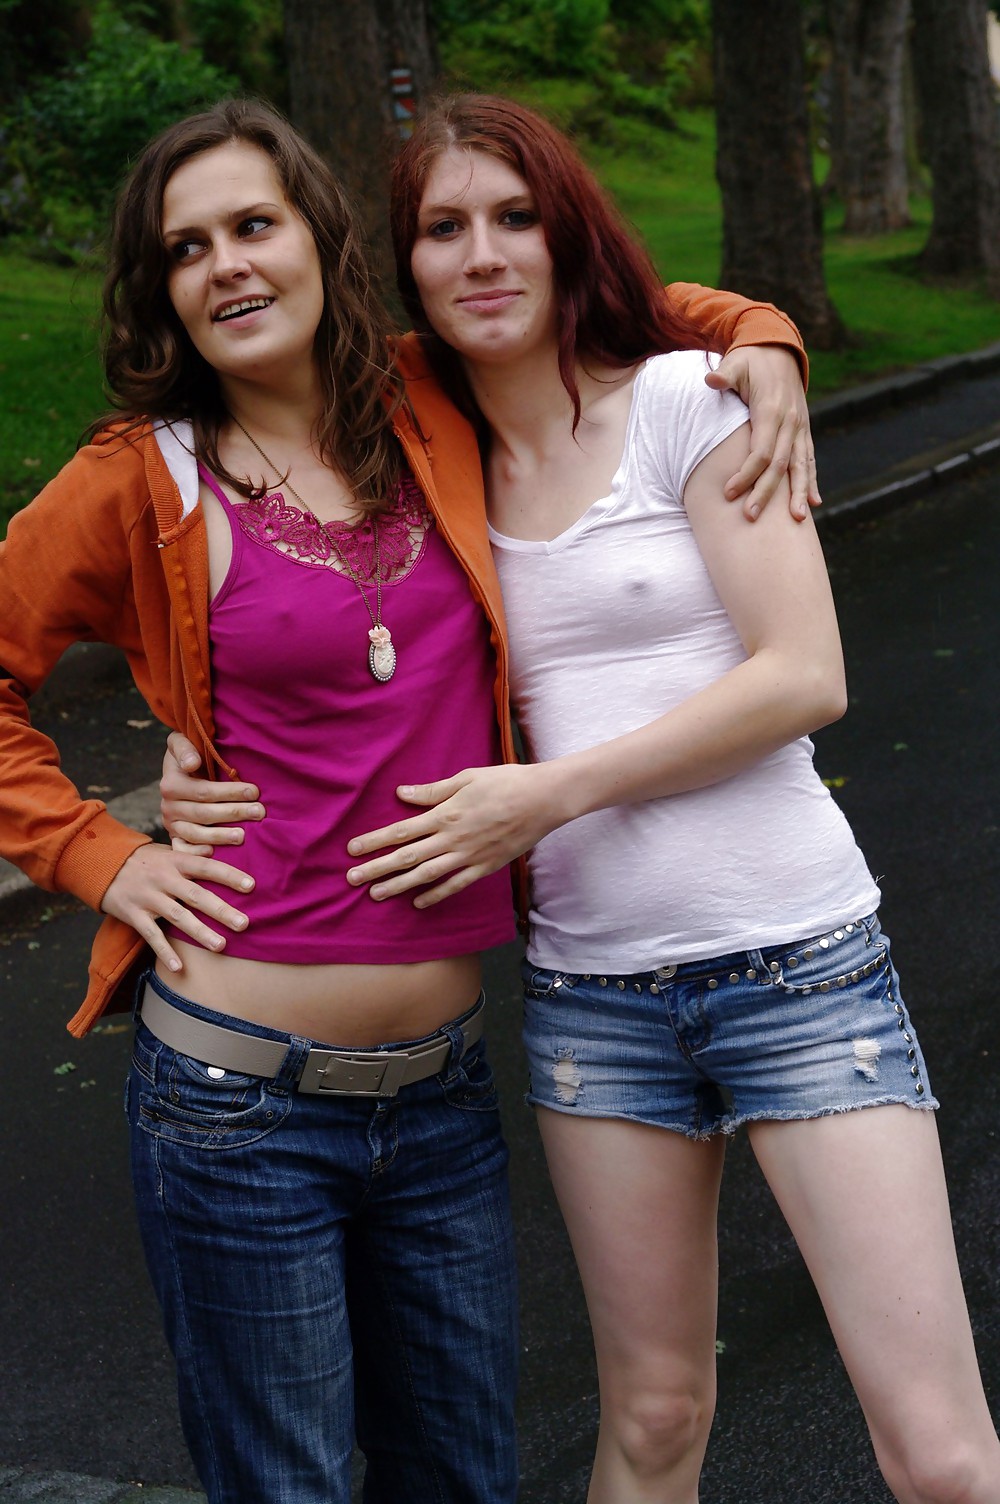 Beautys in jeans 20 - no porn #7033278